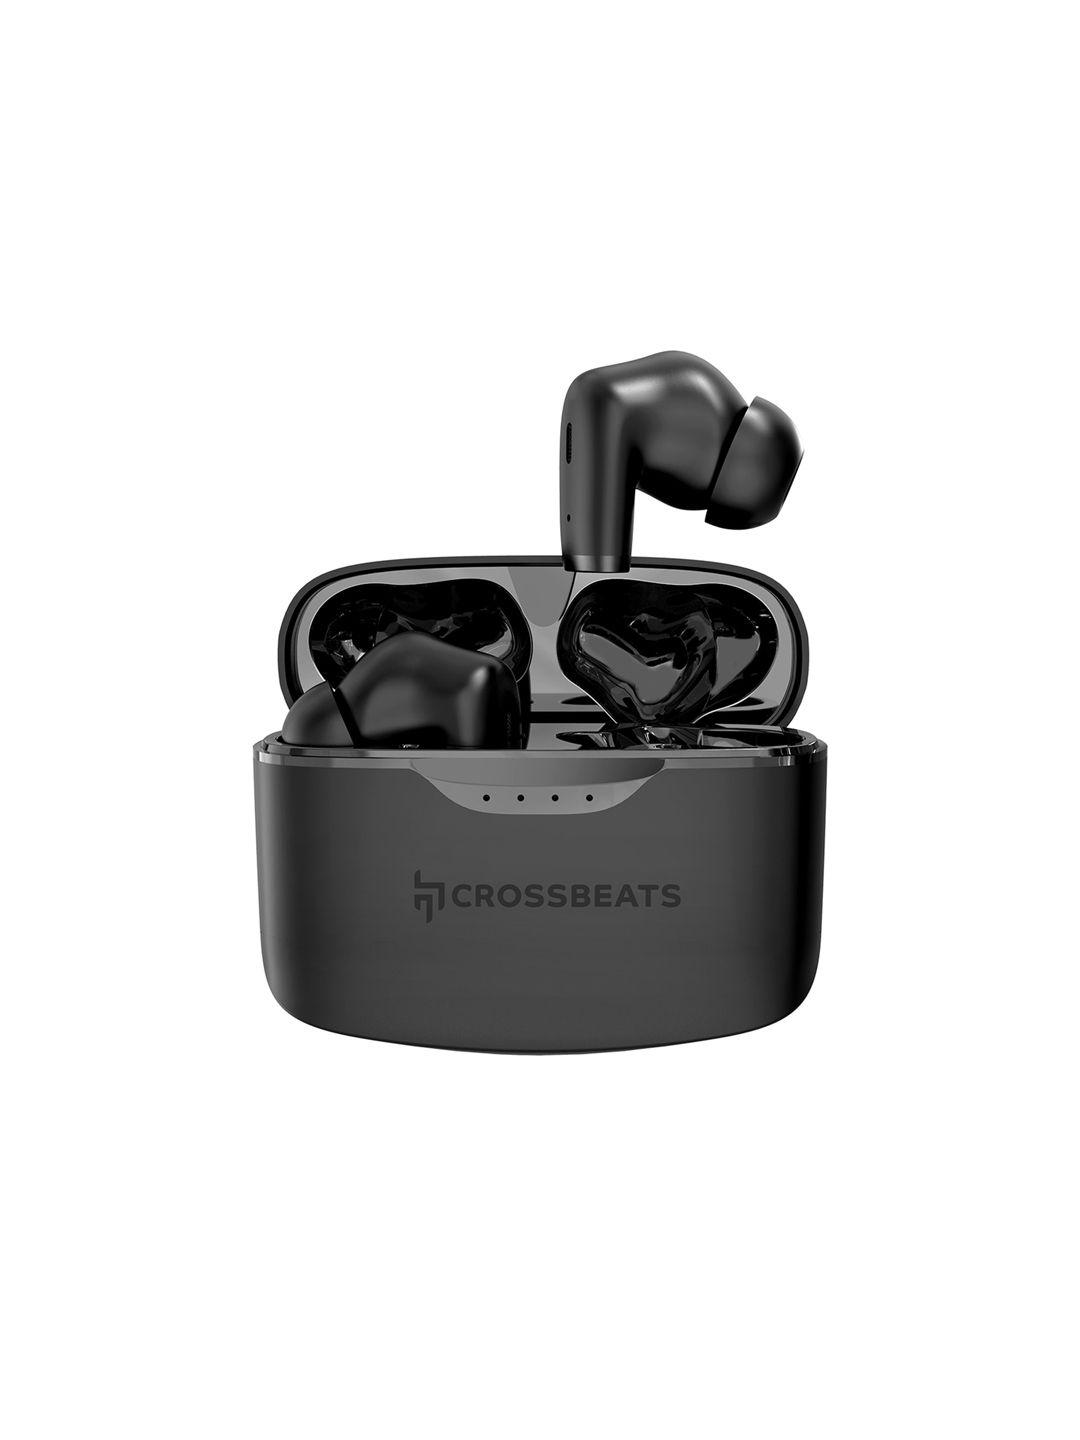 crossbeats opera 2.0 opera earbuds with 60hours playtime wireless charging support